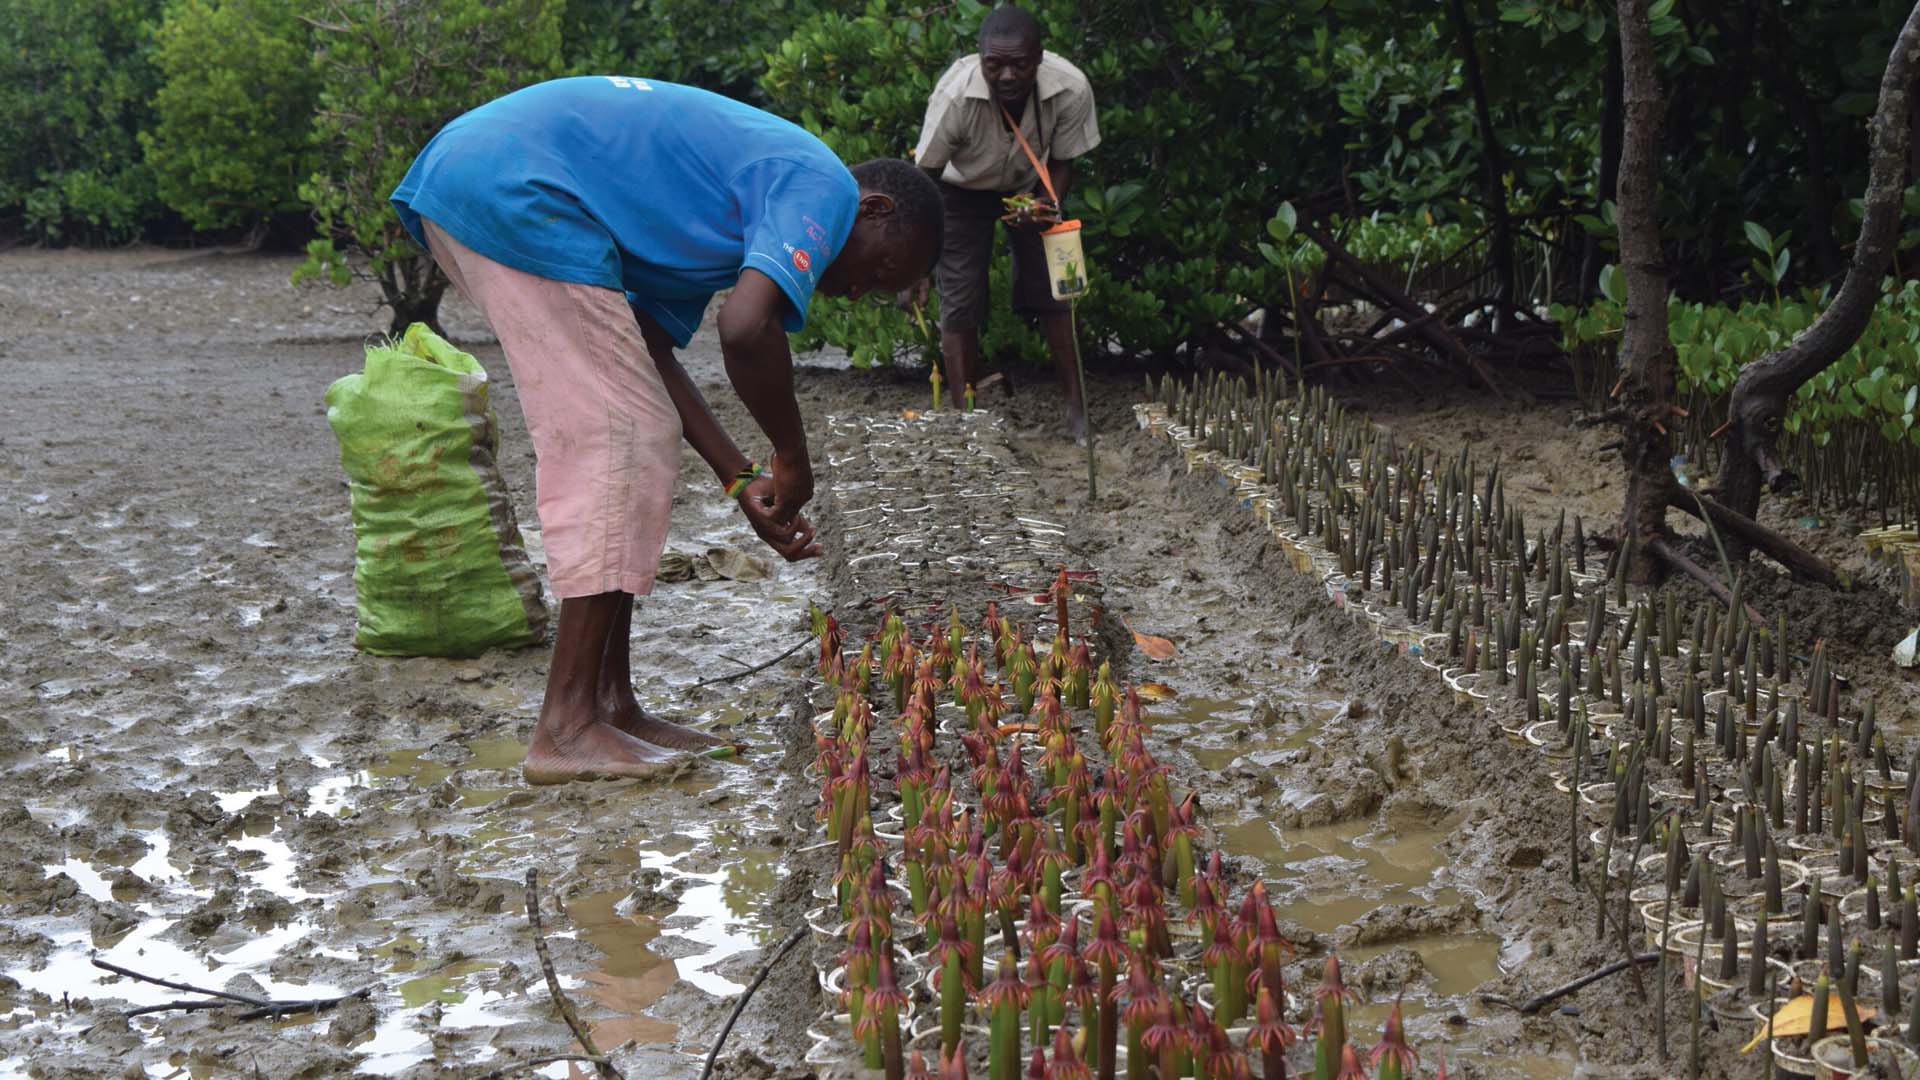 Replanting mangrove trees for a forest